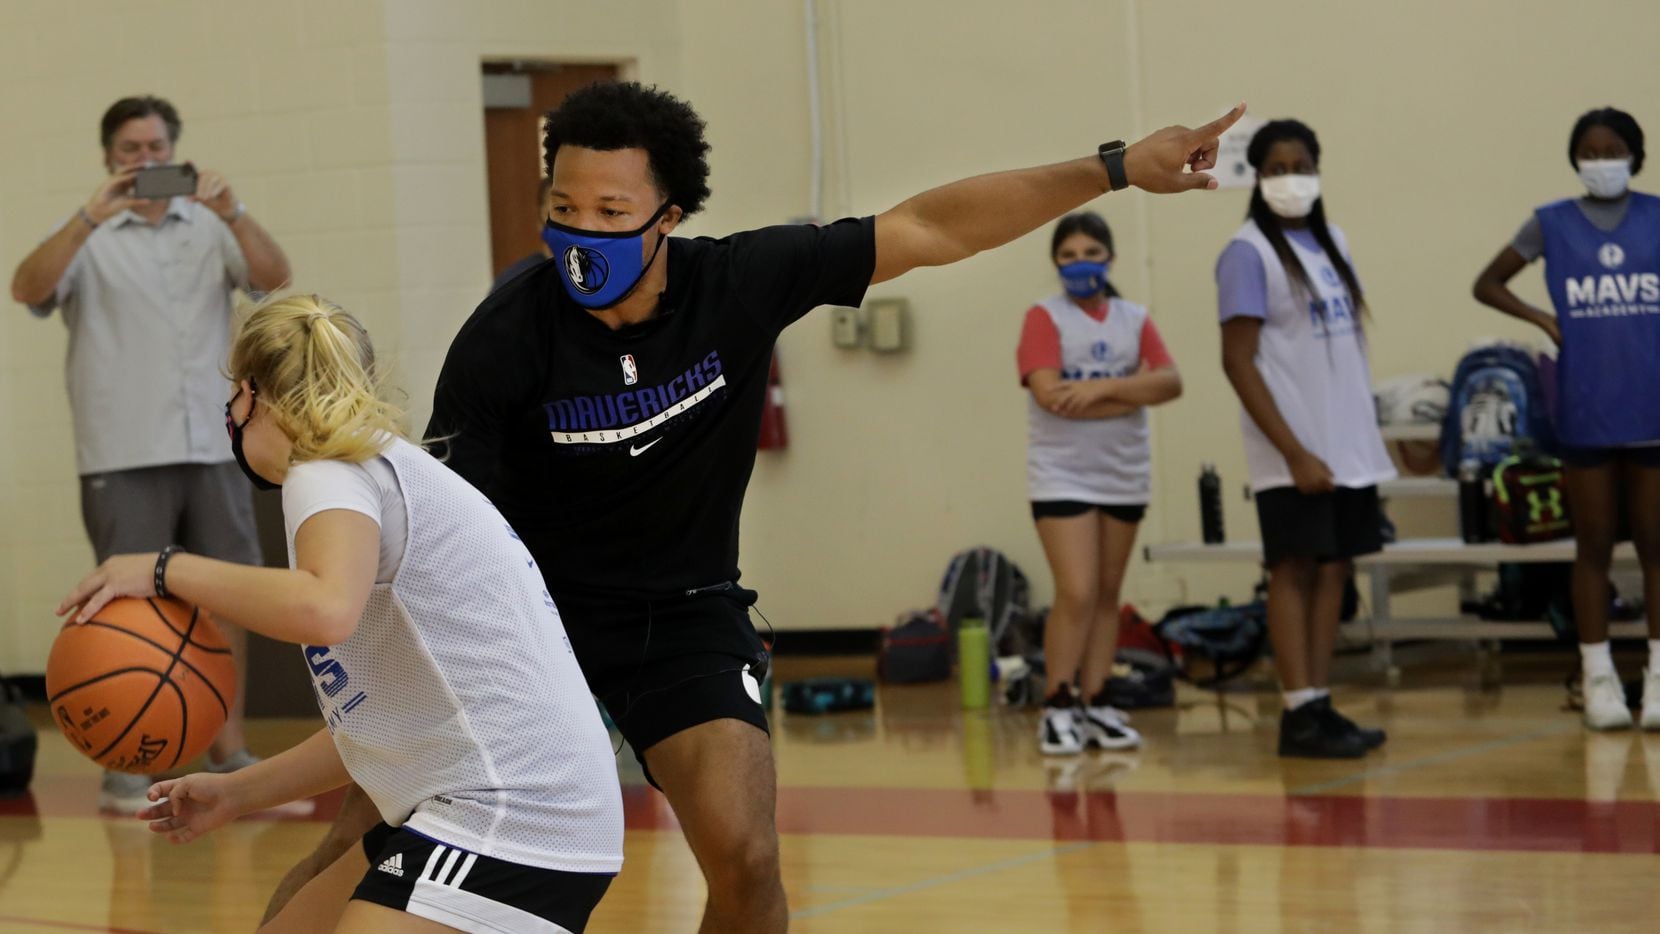 15-year-old Charlotte Collins, left, goes head to head with Jalen Brunson as he interacts with young basketball players during the Mavs Academy Hoop Camp at the Frisco Athletic Center in Frisco, TX, on Jul. 27, 2021.